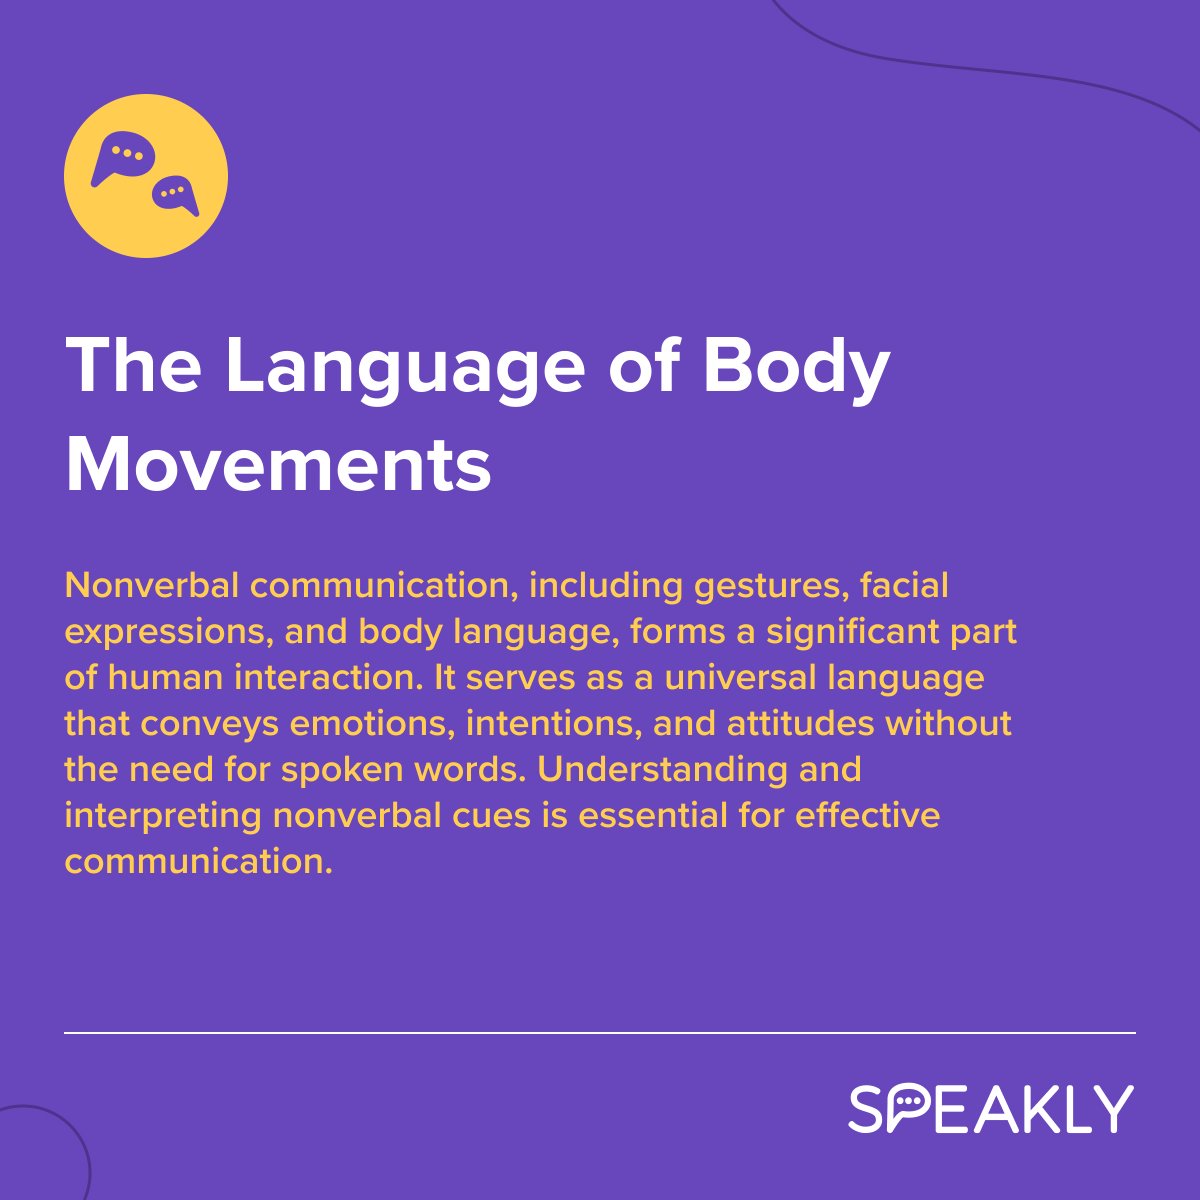 And are you good at the nonverbal language? Share with us!
⠀
#BodyLanguage #NonverbalCommunication #EffectiveCommunication #InterpersonalSkills #UnderstandingOthers